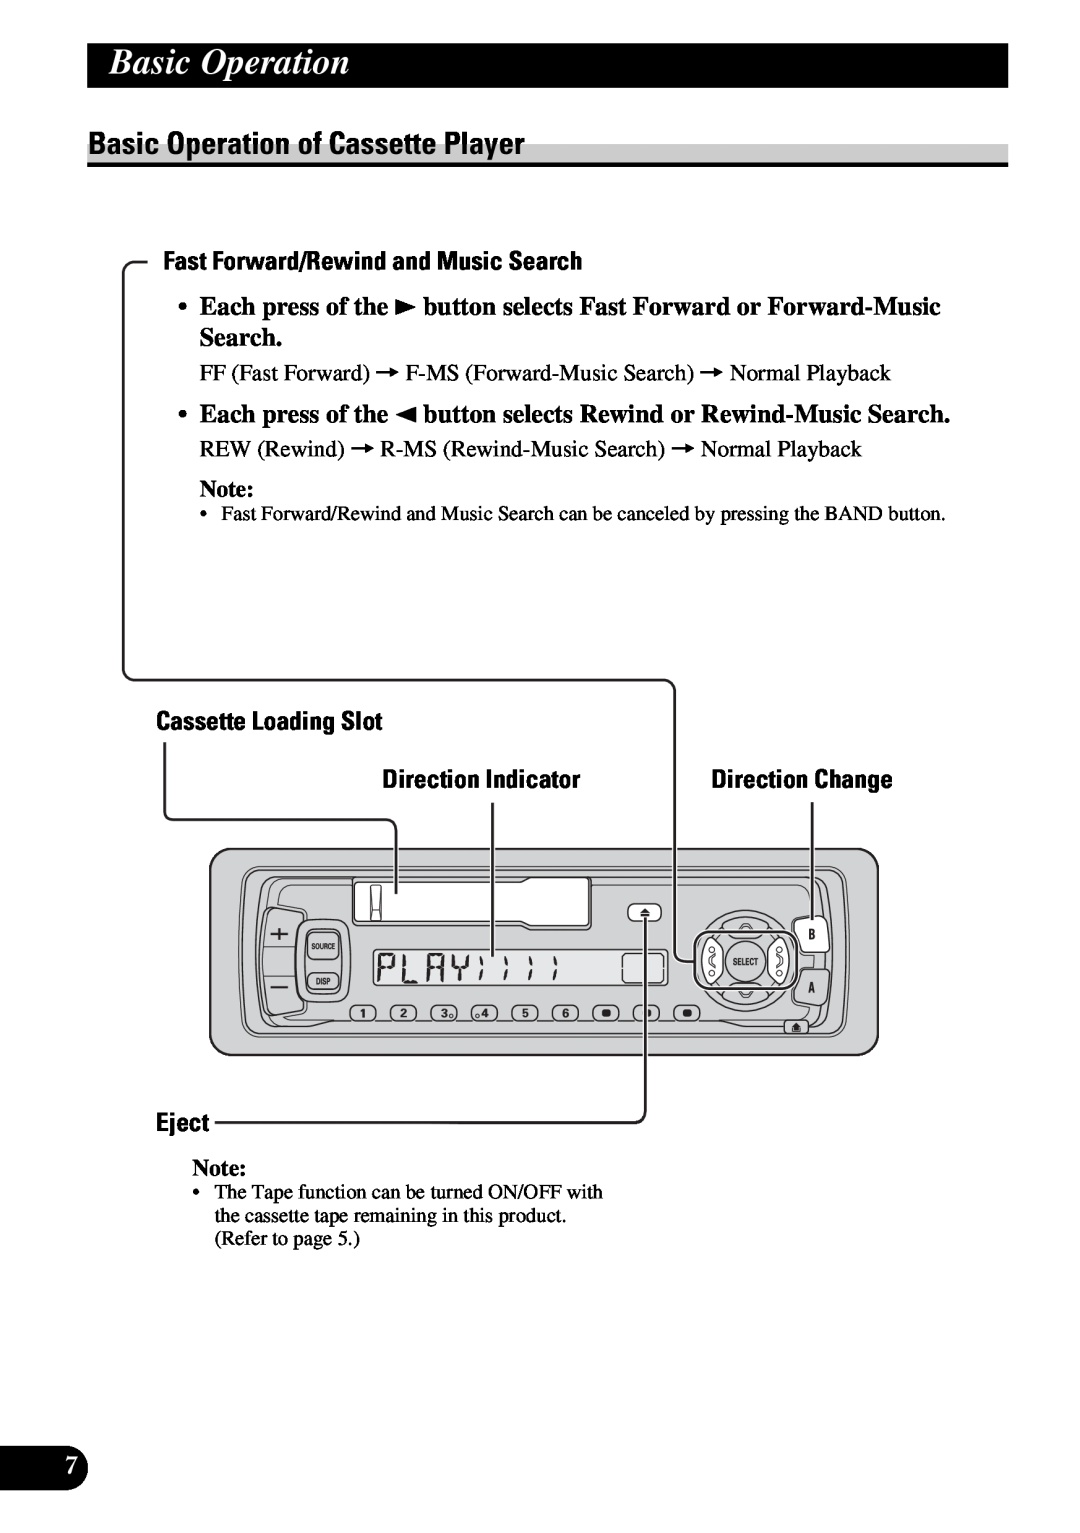 Pioneer KEH-3930R Basic Operation of Cassette Player, Fast Forward/Rewind and Music Search, Cassette Loading Slot, Eject 